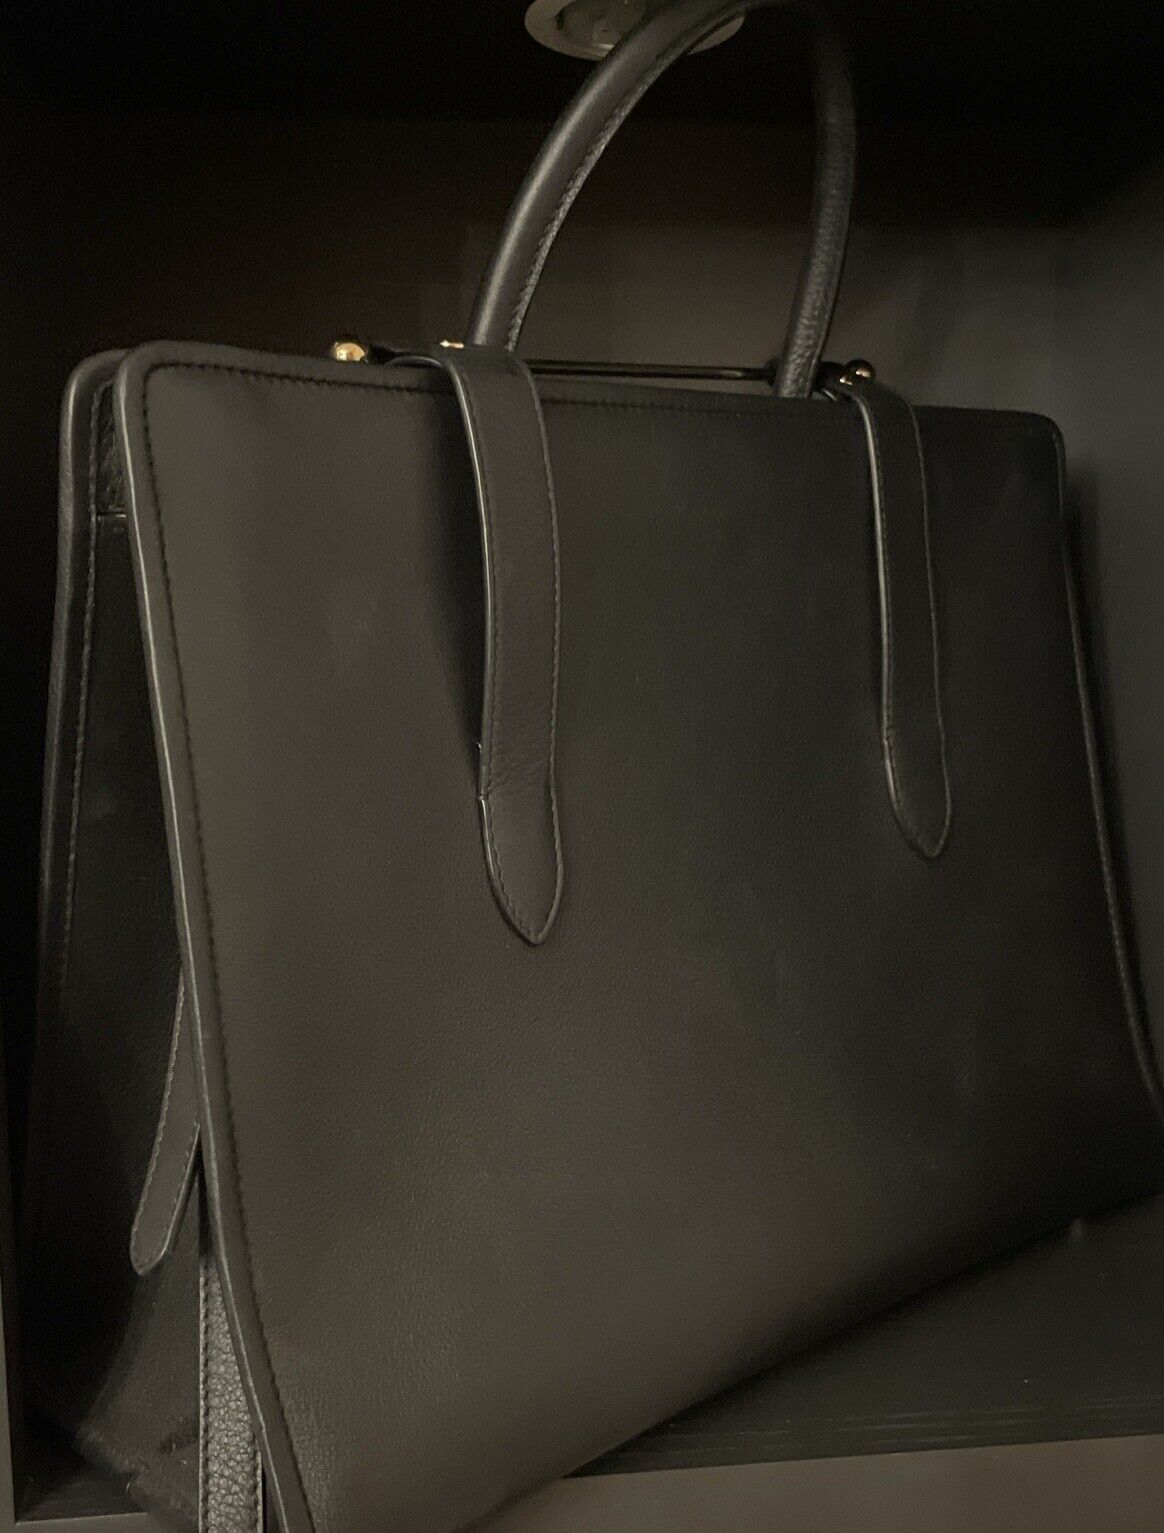 Strathberry Tote - 100% Leather - image 5